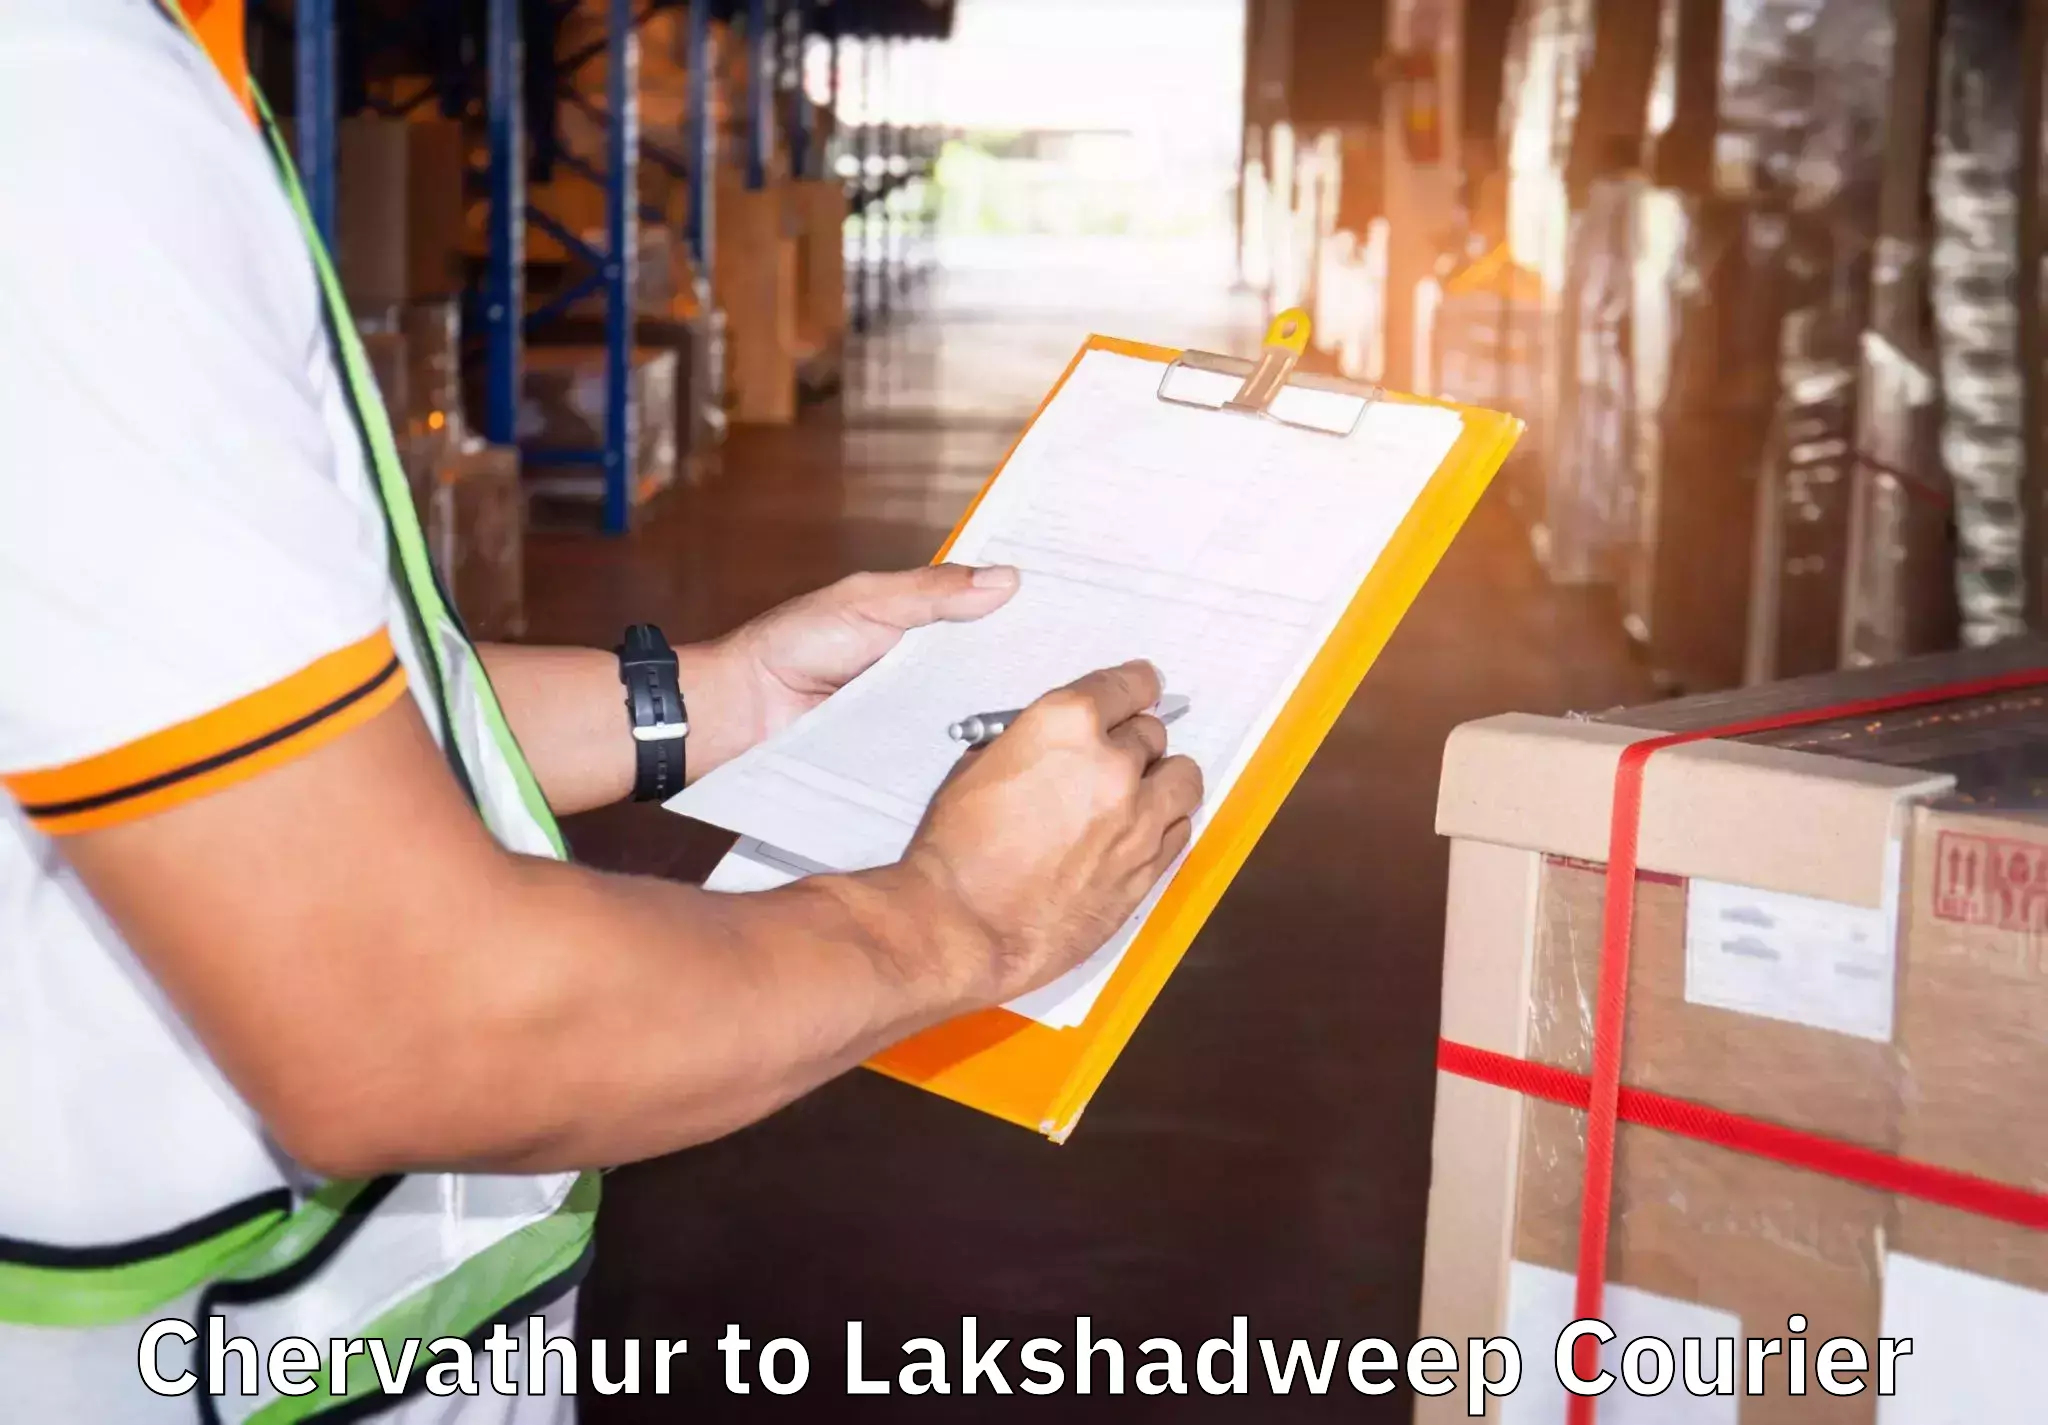 Quality moving services Chervathur to Lakshadweep